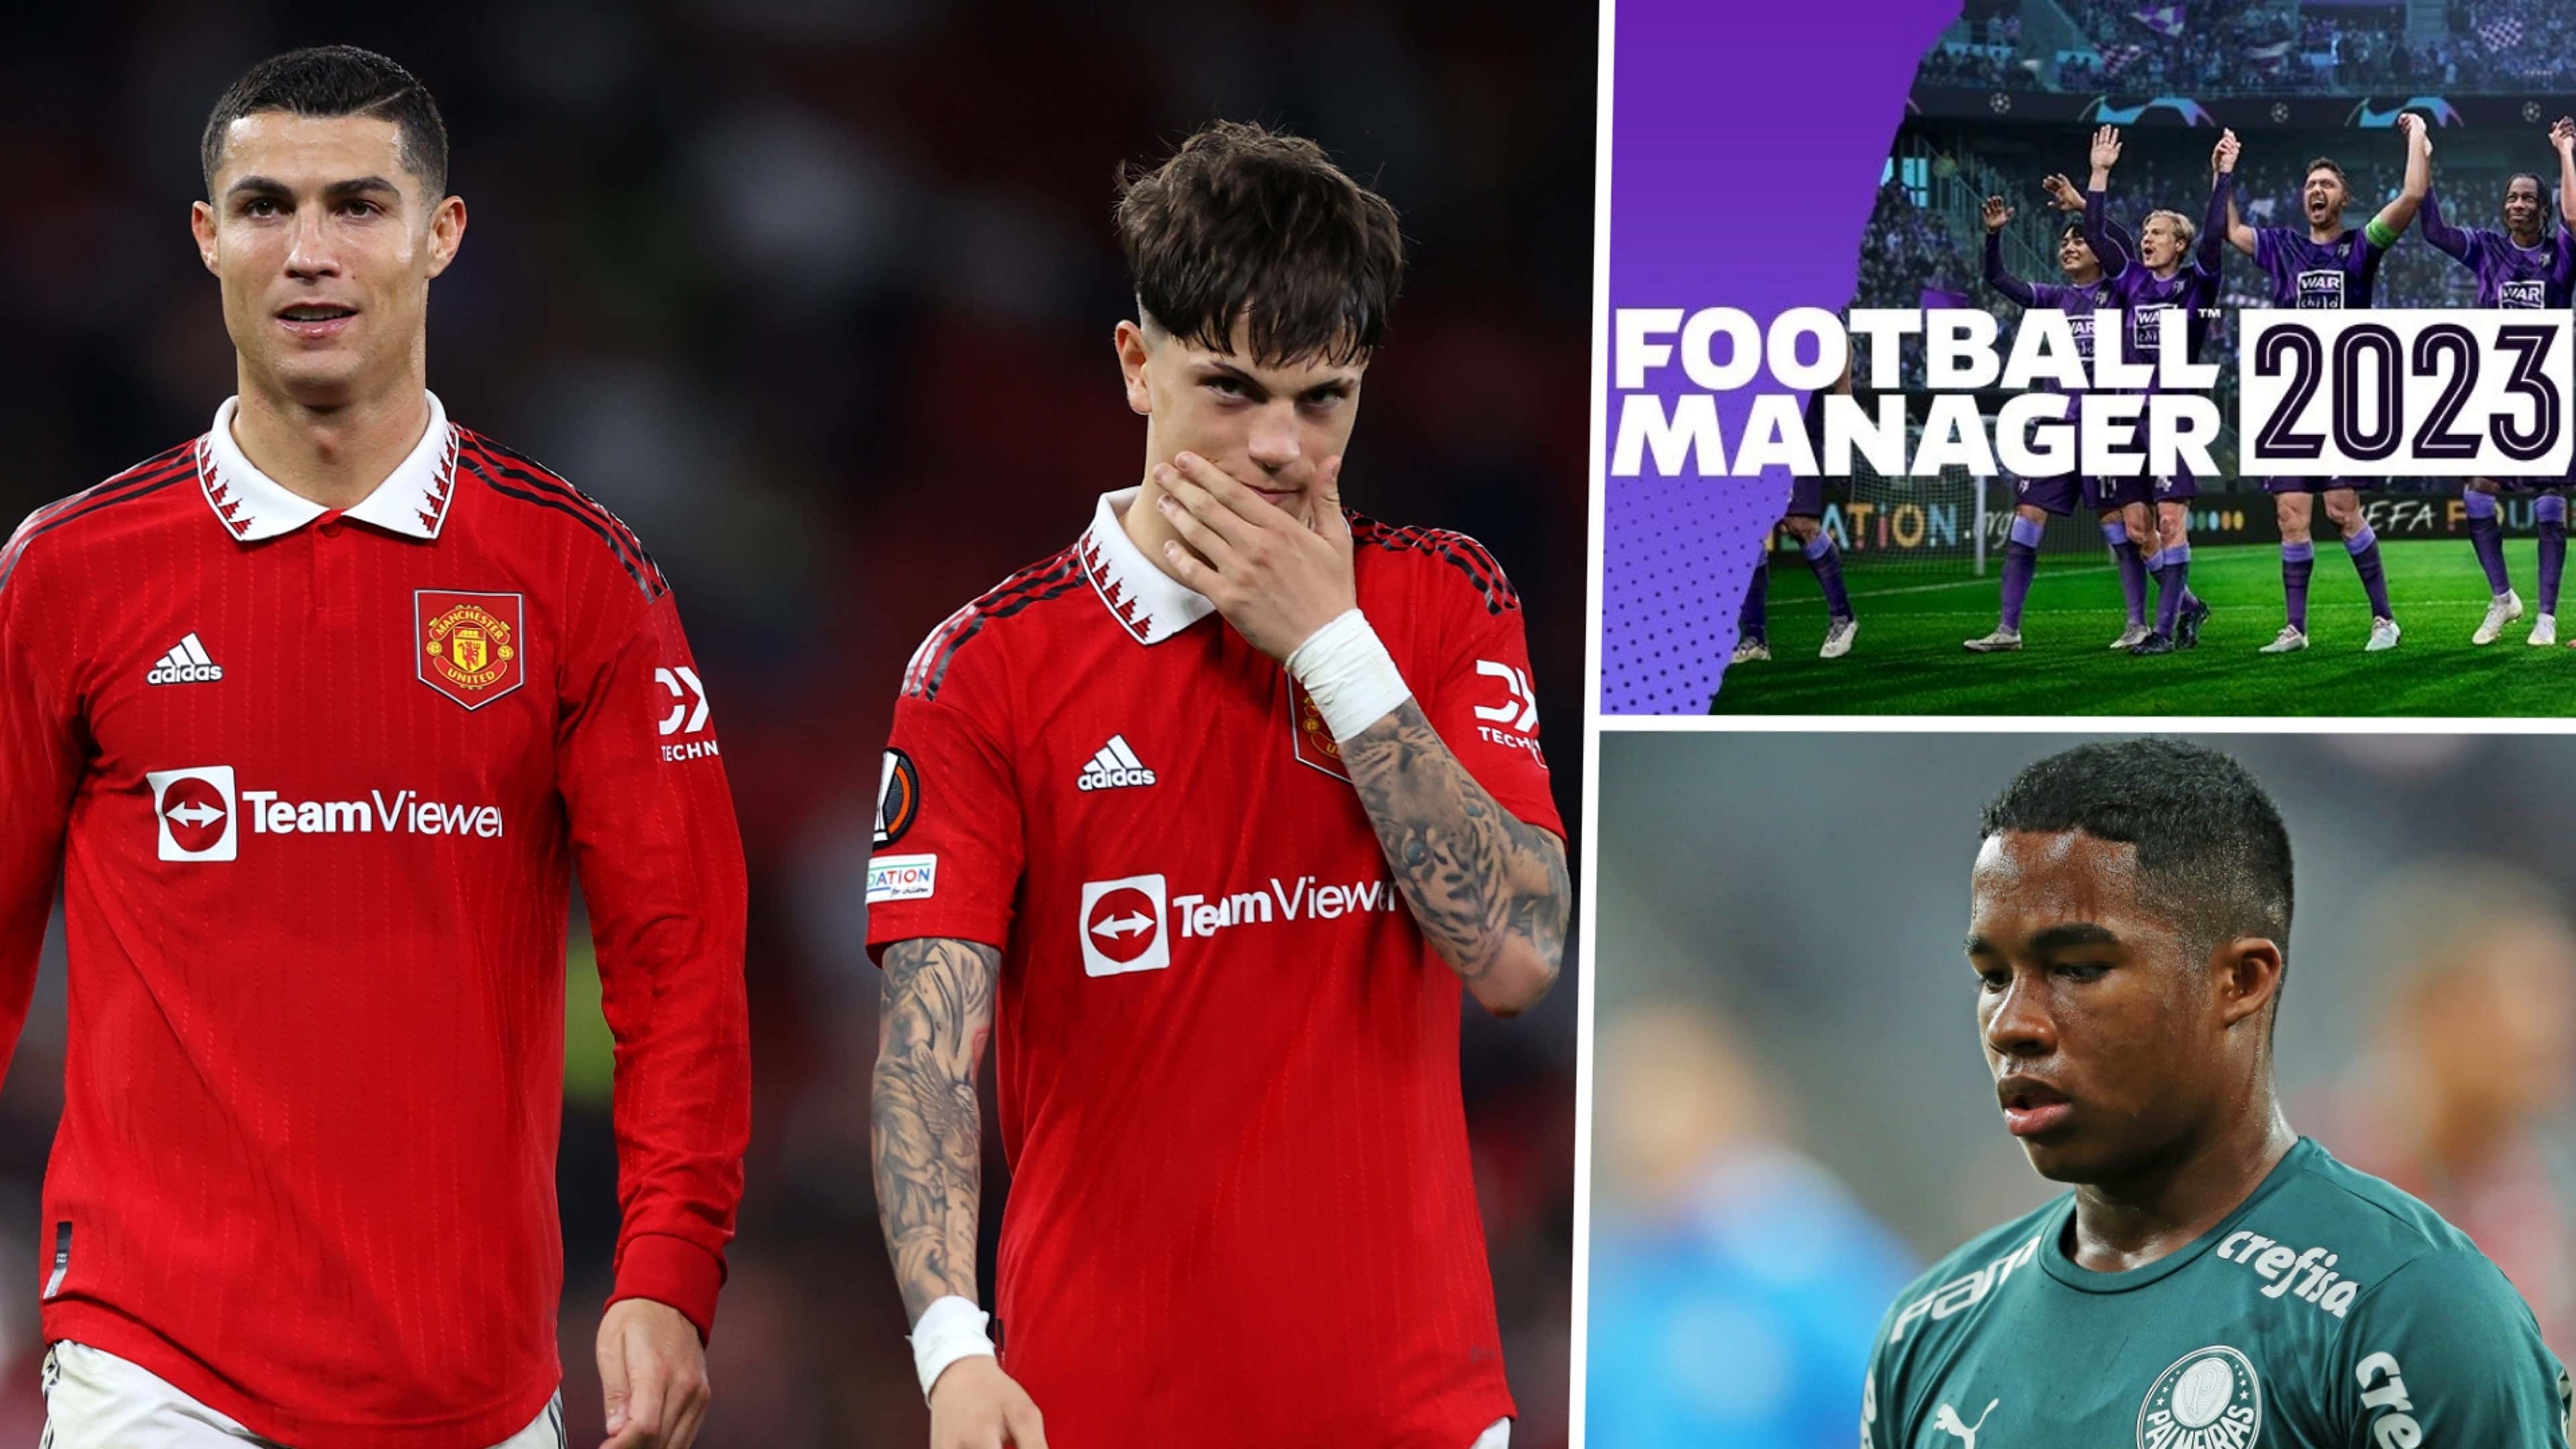 Football Manager 2022: Best Wonderkids You Can Buy For Cheap